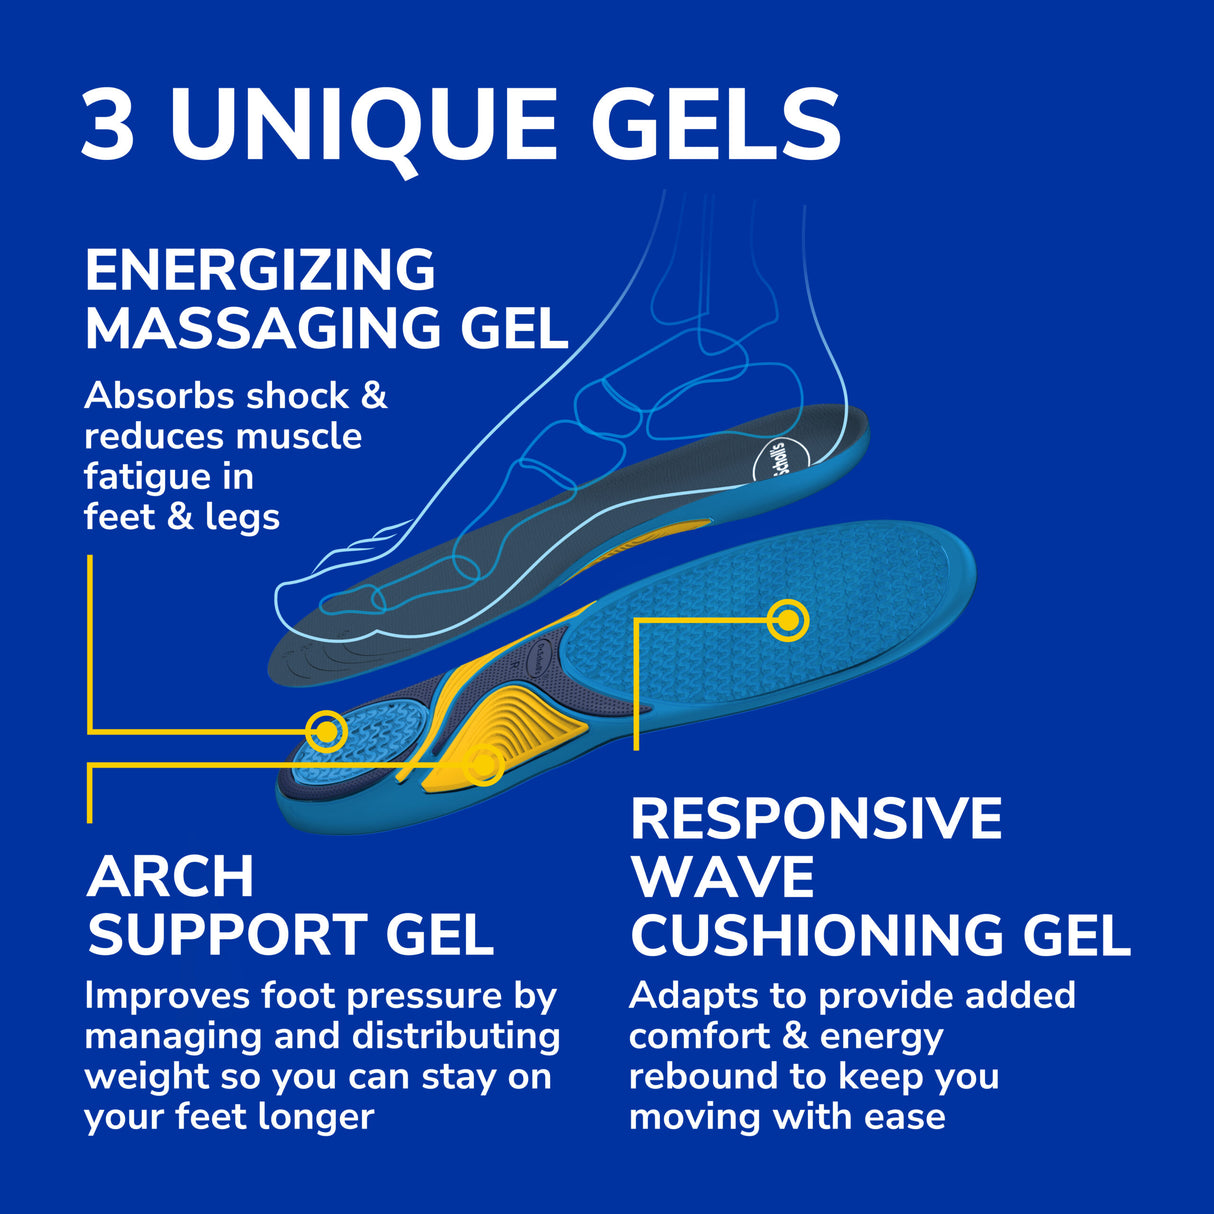 image of 3 unique gels, energizing massaging gel, arch support gel and responsive wave cushioning gel